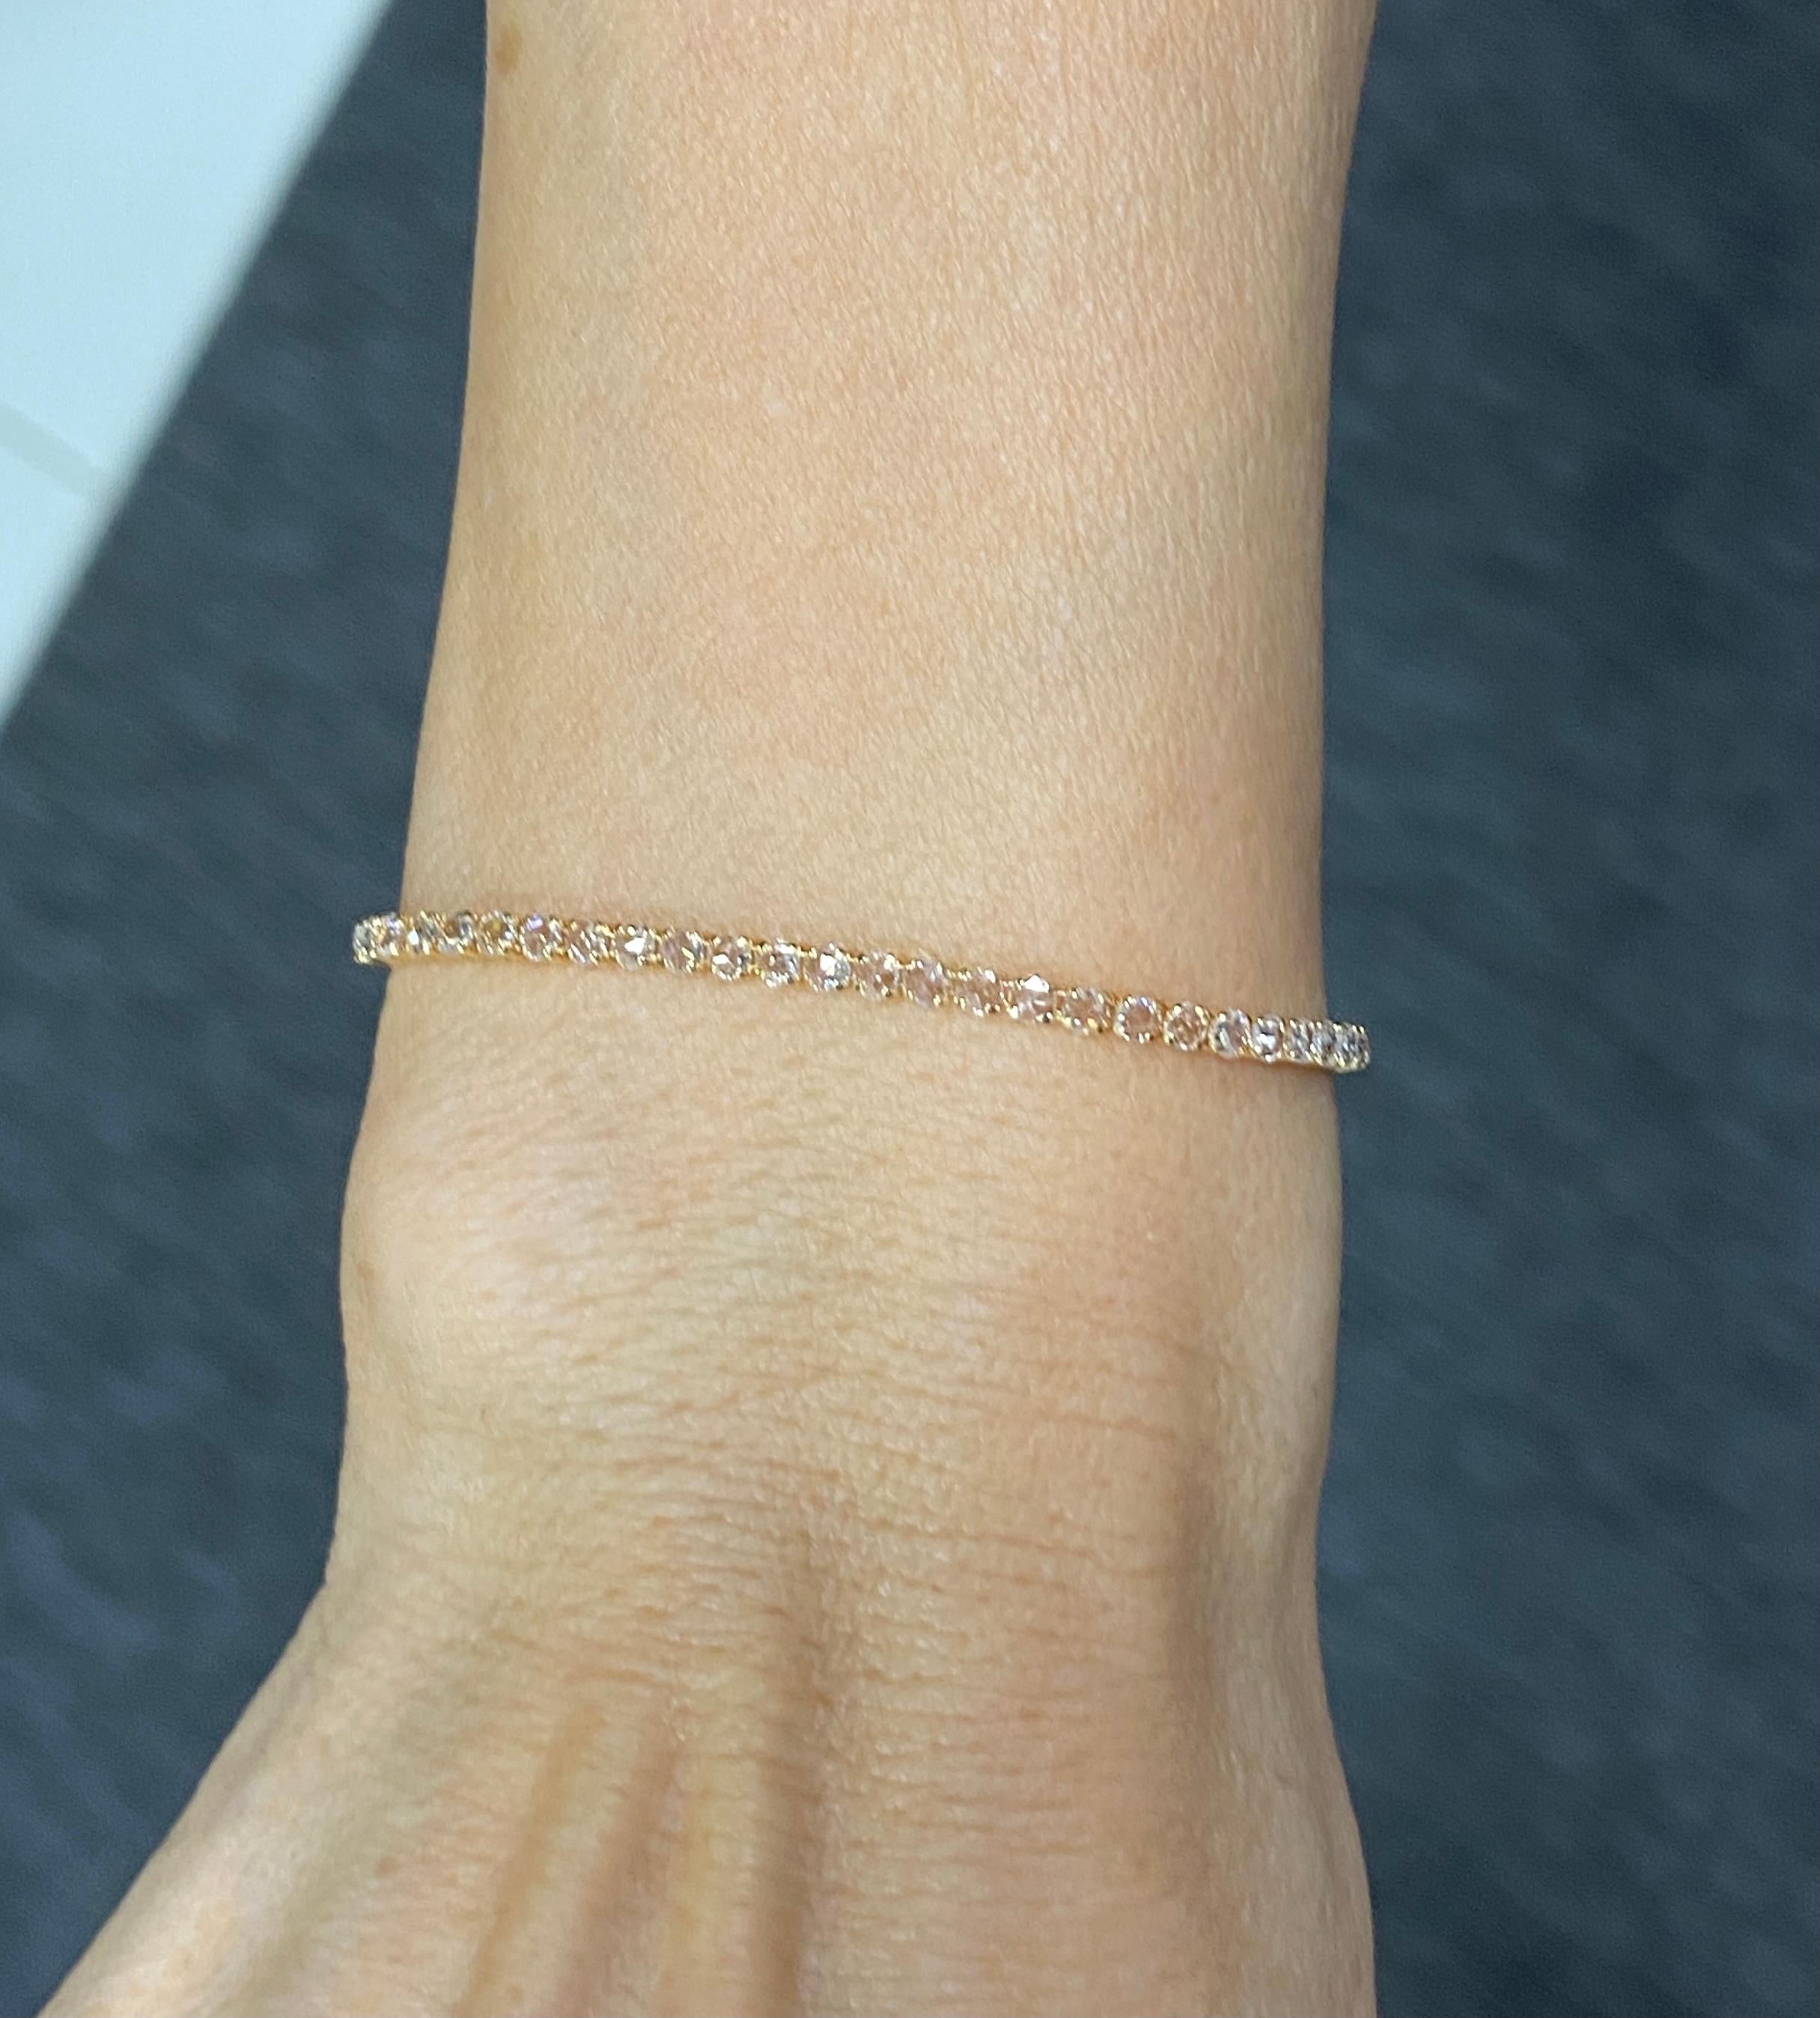 1.72 carats Rose Cut 18 Karat Yellow Gold Tennis Bracelet    

Our Rose Cut tennis bracelet extremely wearable. Its versatility and classic design make it a great accompaniment to various occasions. Beautifully made with calibrated Rose Cut Diamond,